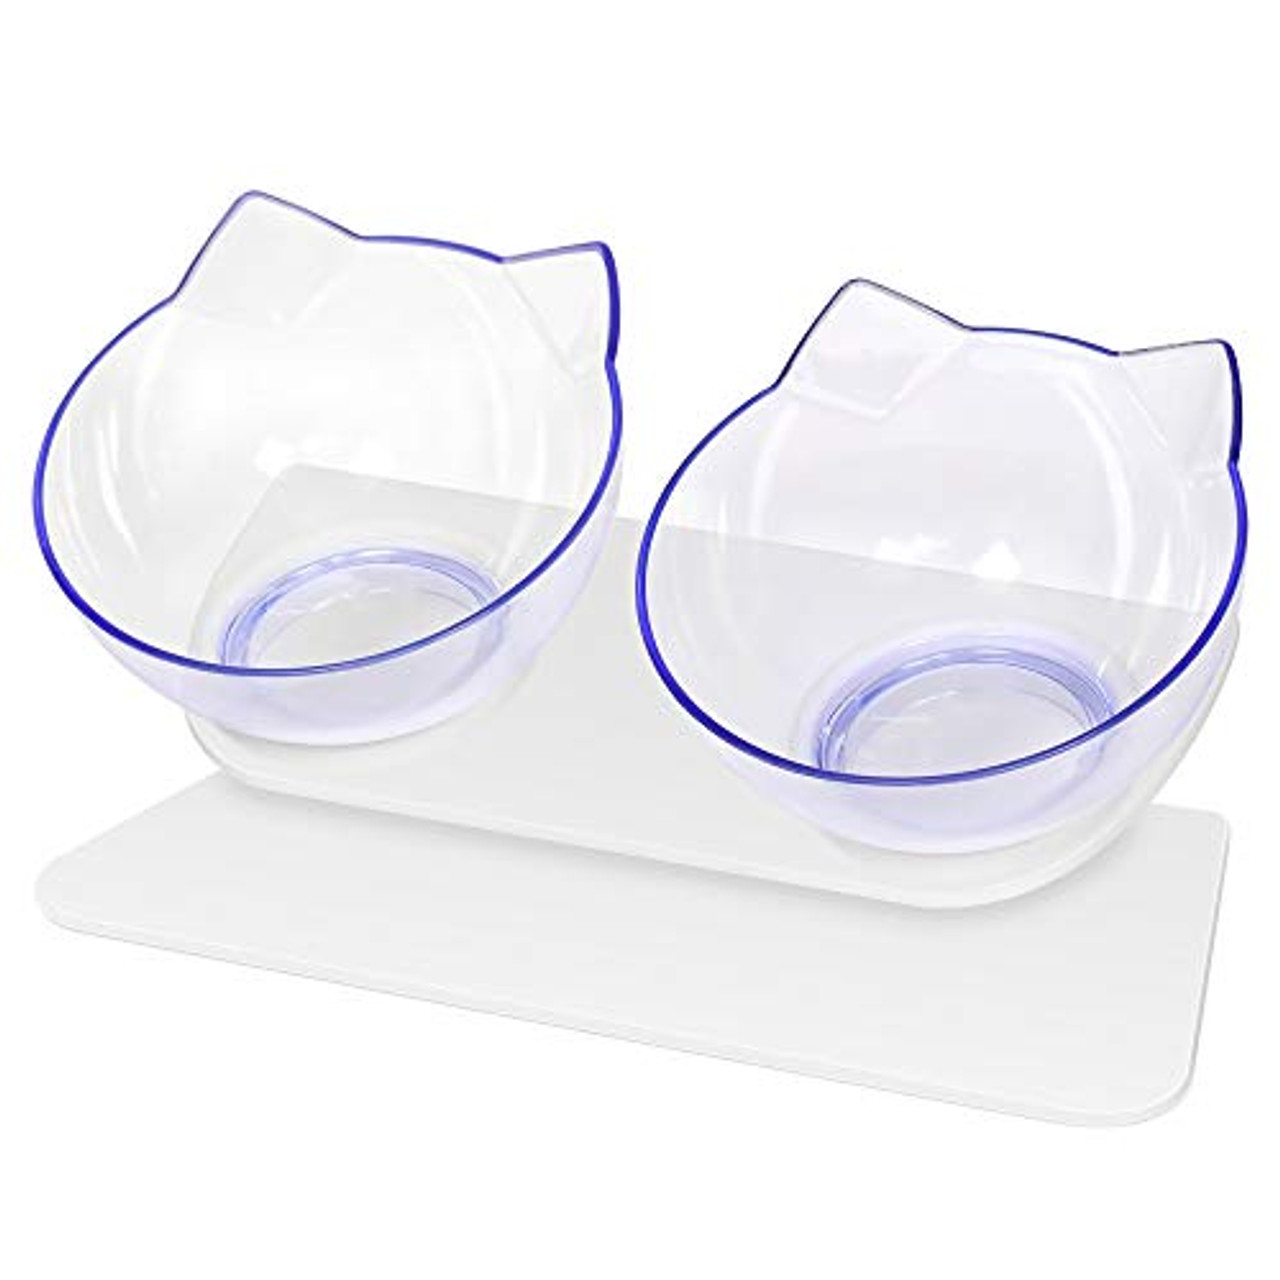 Vikedi Elevated Double Cat Bowl with Feeding Mat and Spoon, Cat Food Water  Bowls with Raised Stand, Pet Feeding Bowl